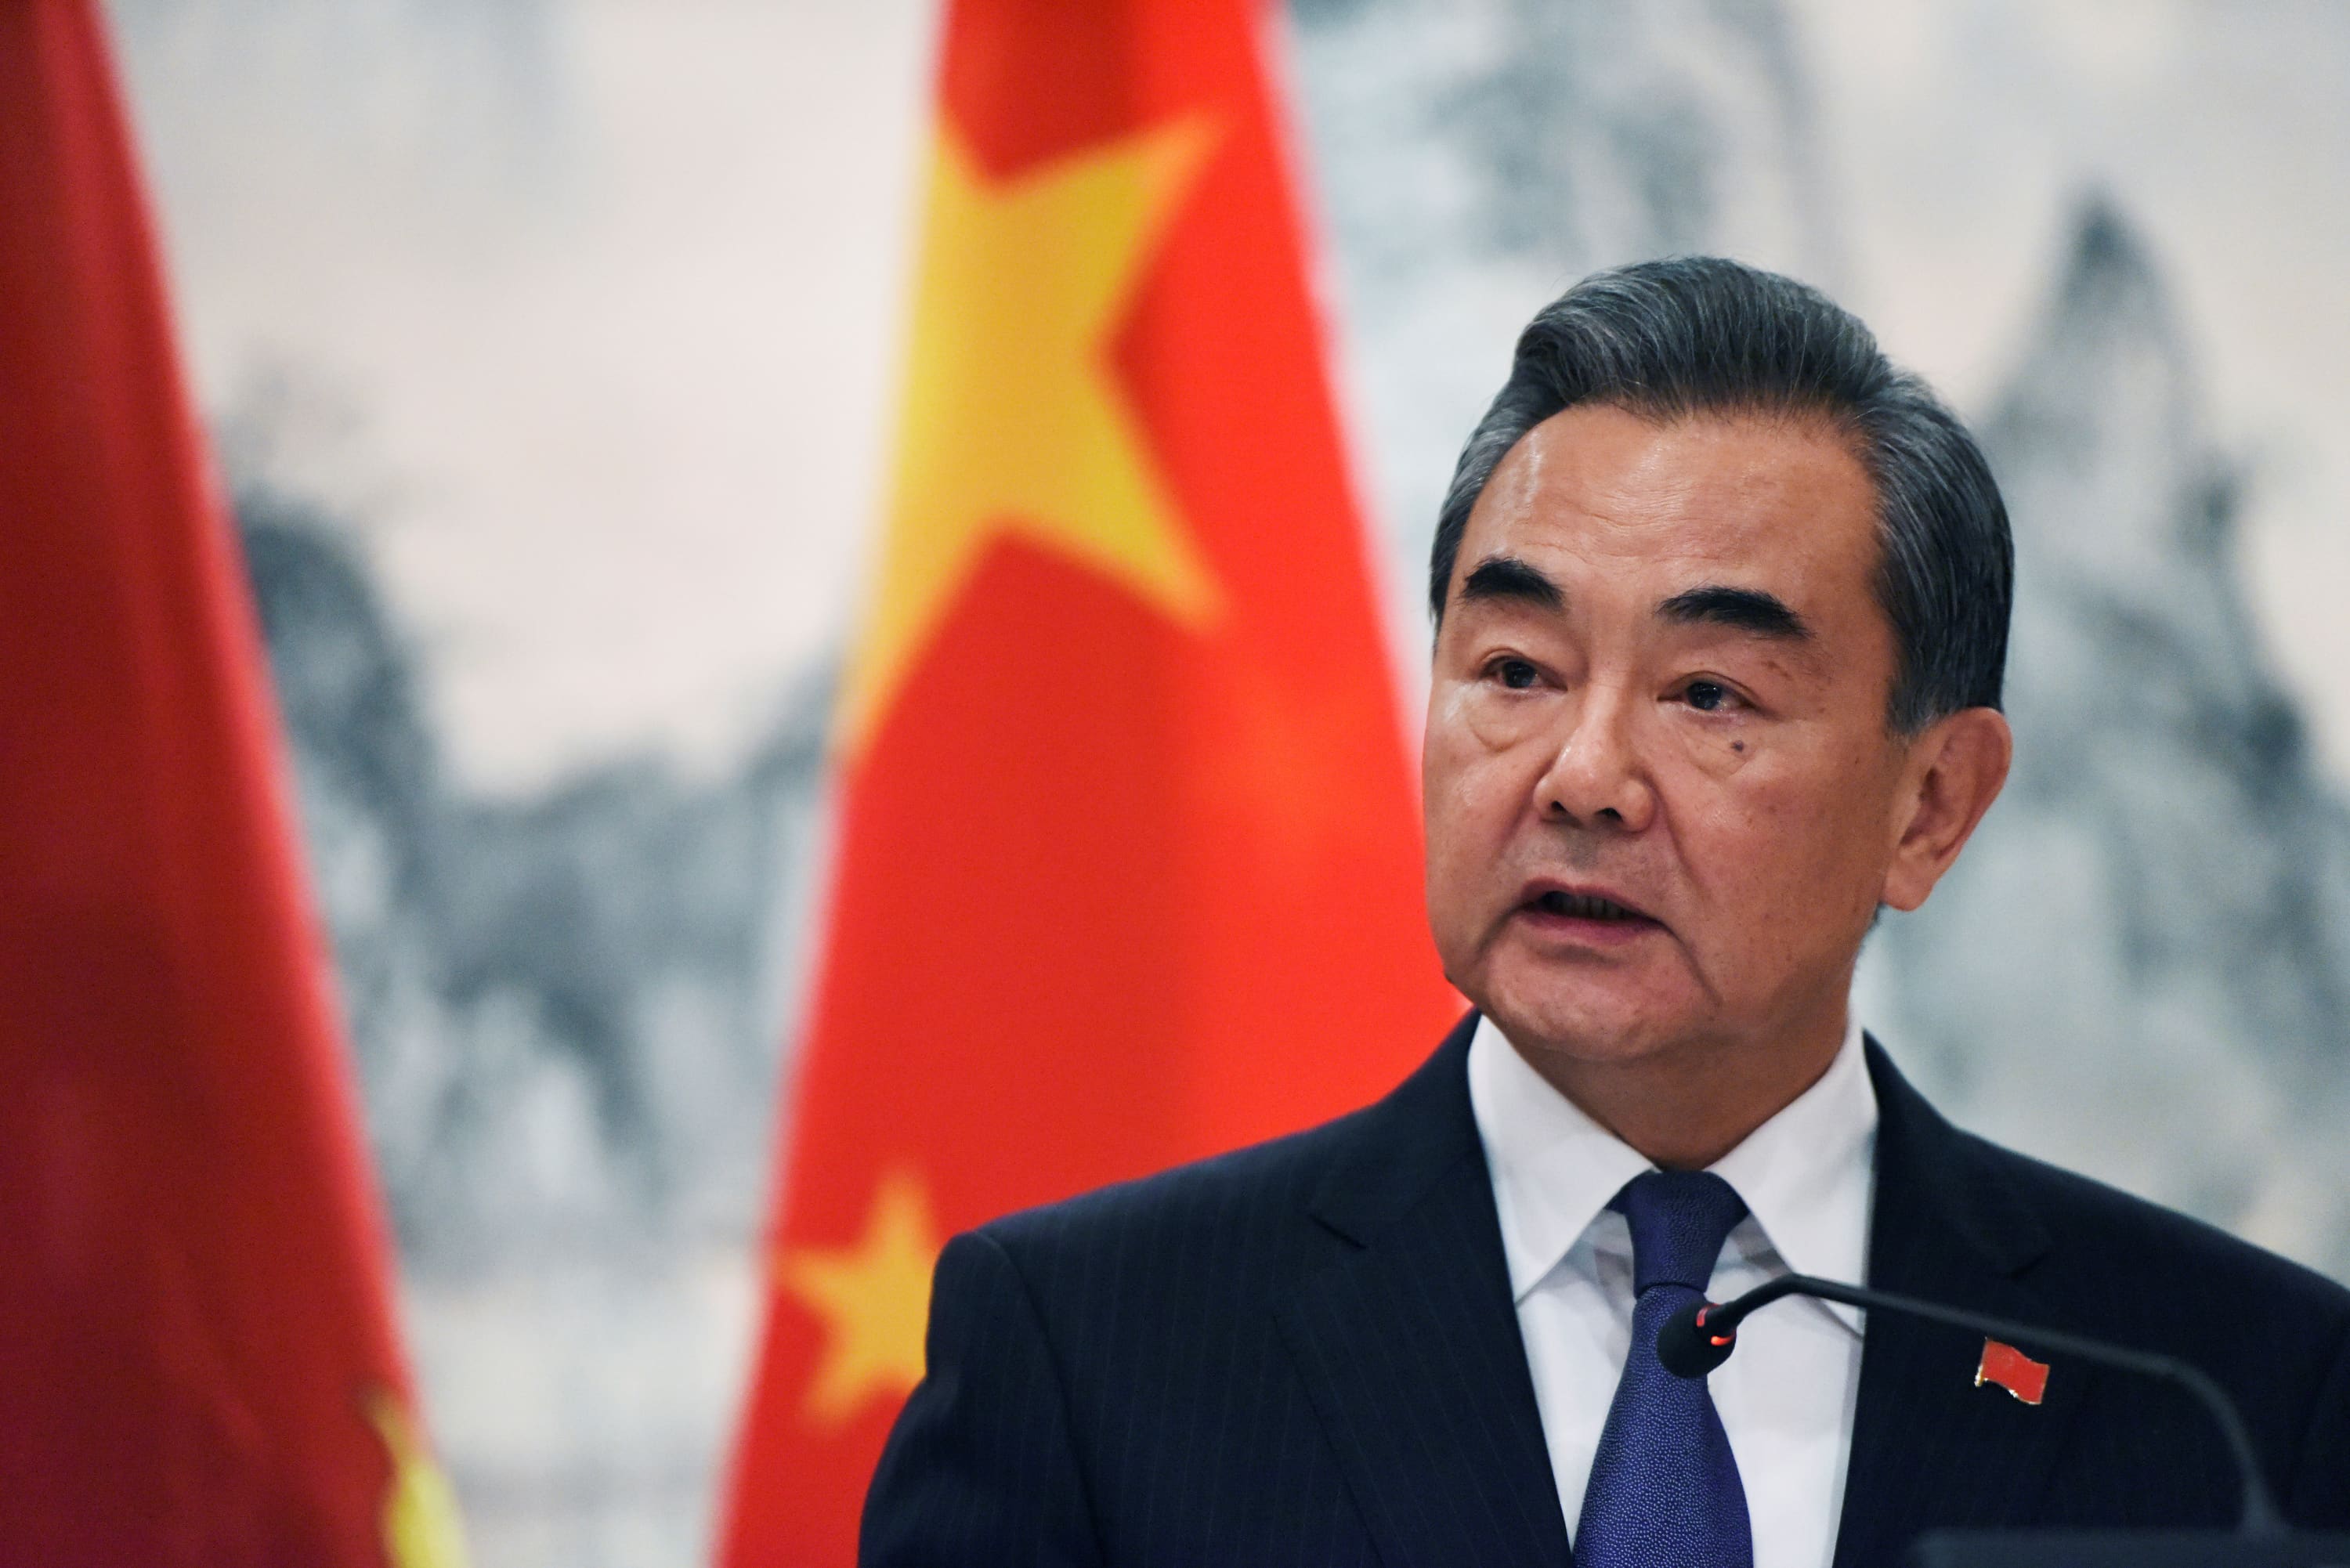 China’s Foreign Minister calls on the US to remove tariff sanctions